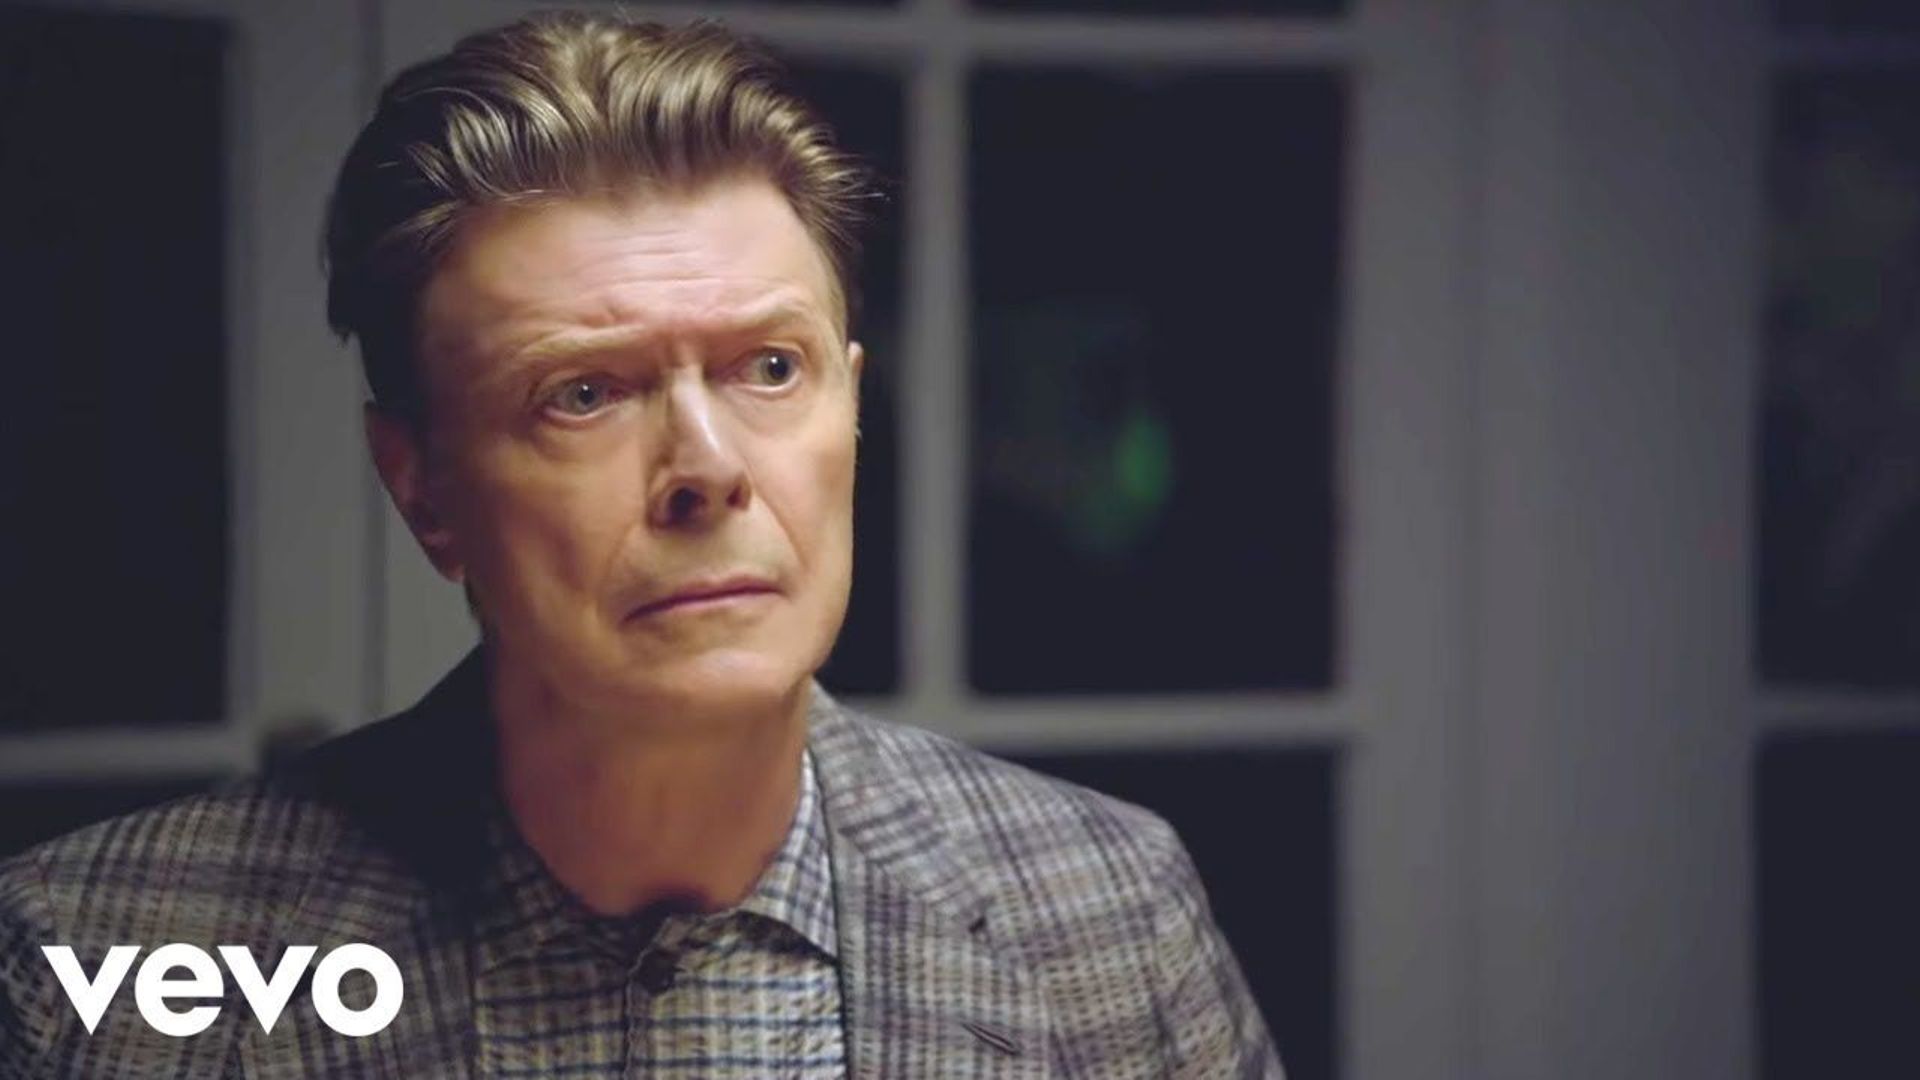 David Bowie : épisode 9 Songs : "Where Are We Now" (2013)